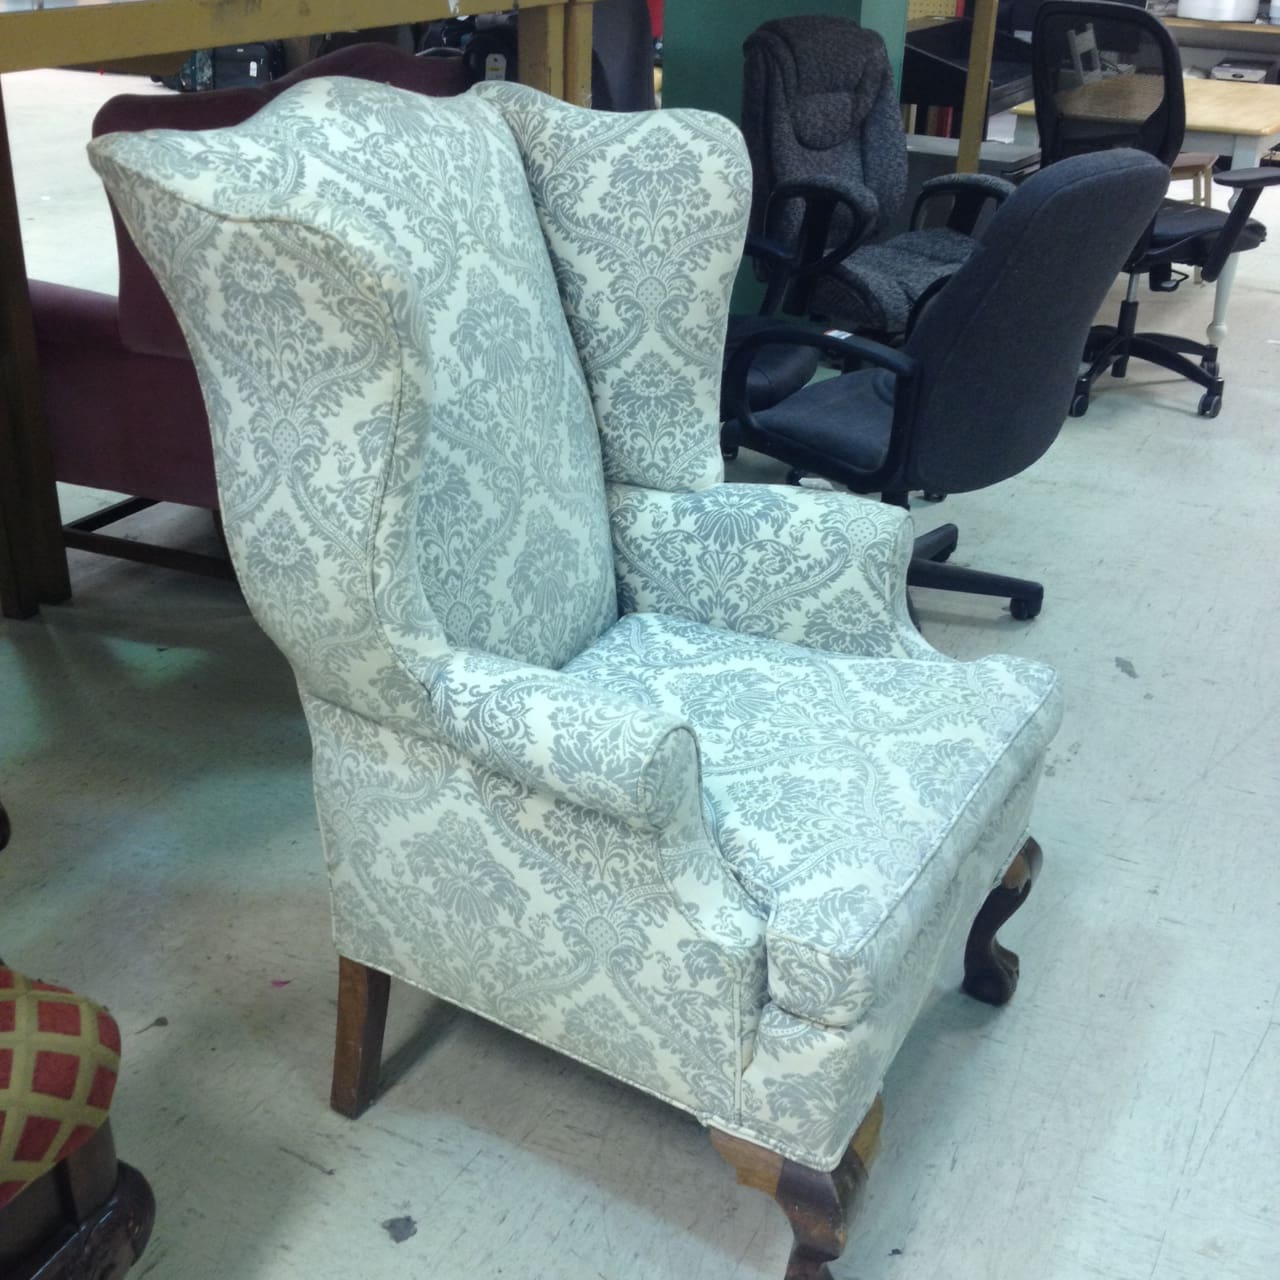 How To Reupholster A Wingback Chair, How Much Does It Cost To Get A Chair Reupholstered Uk